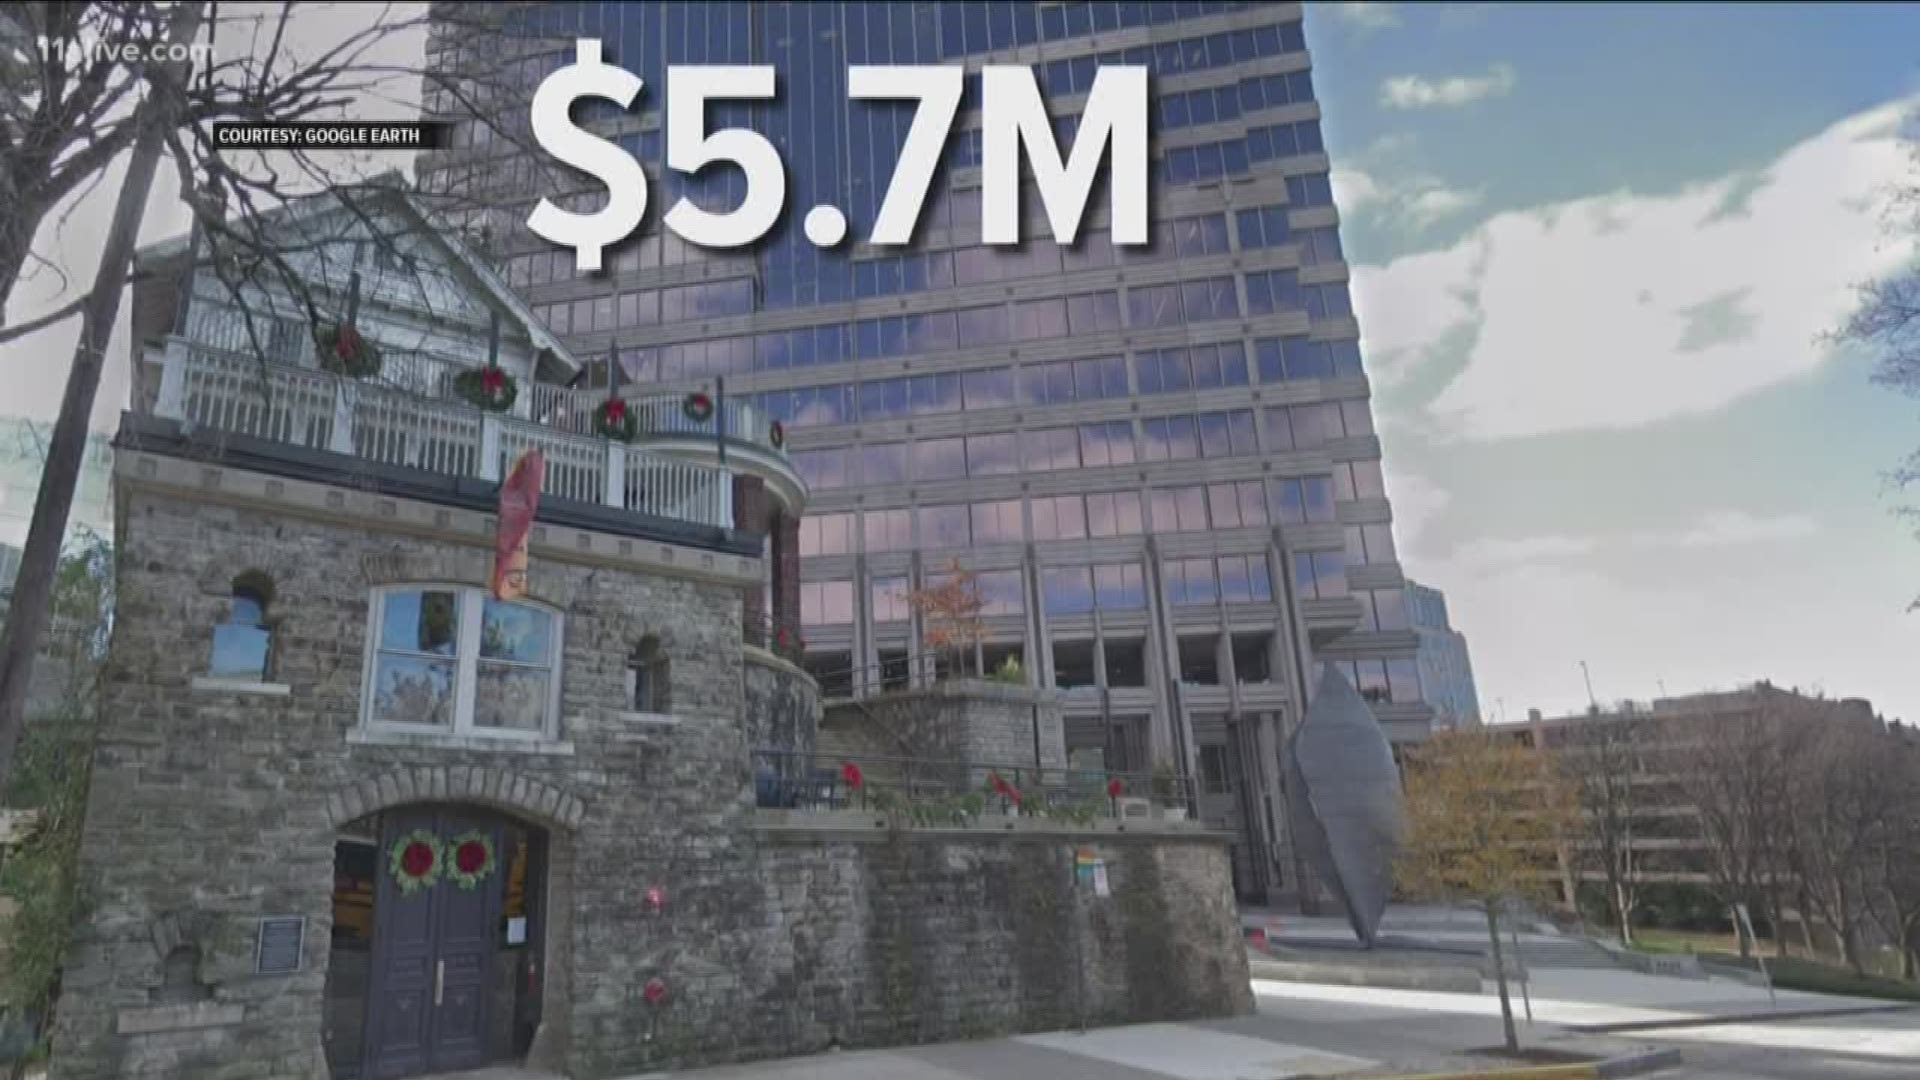 The owner claims the property is worth $5,750,000.